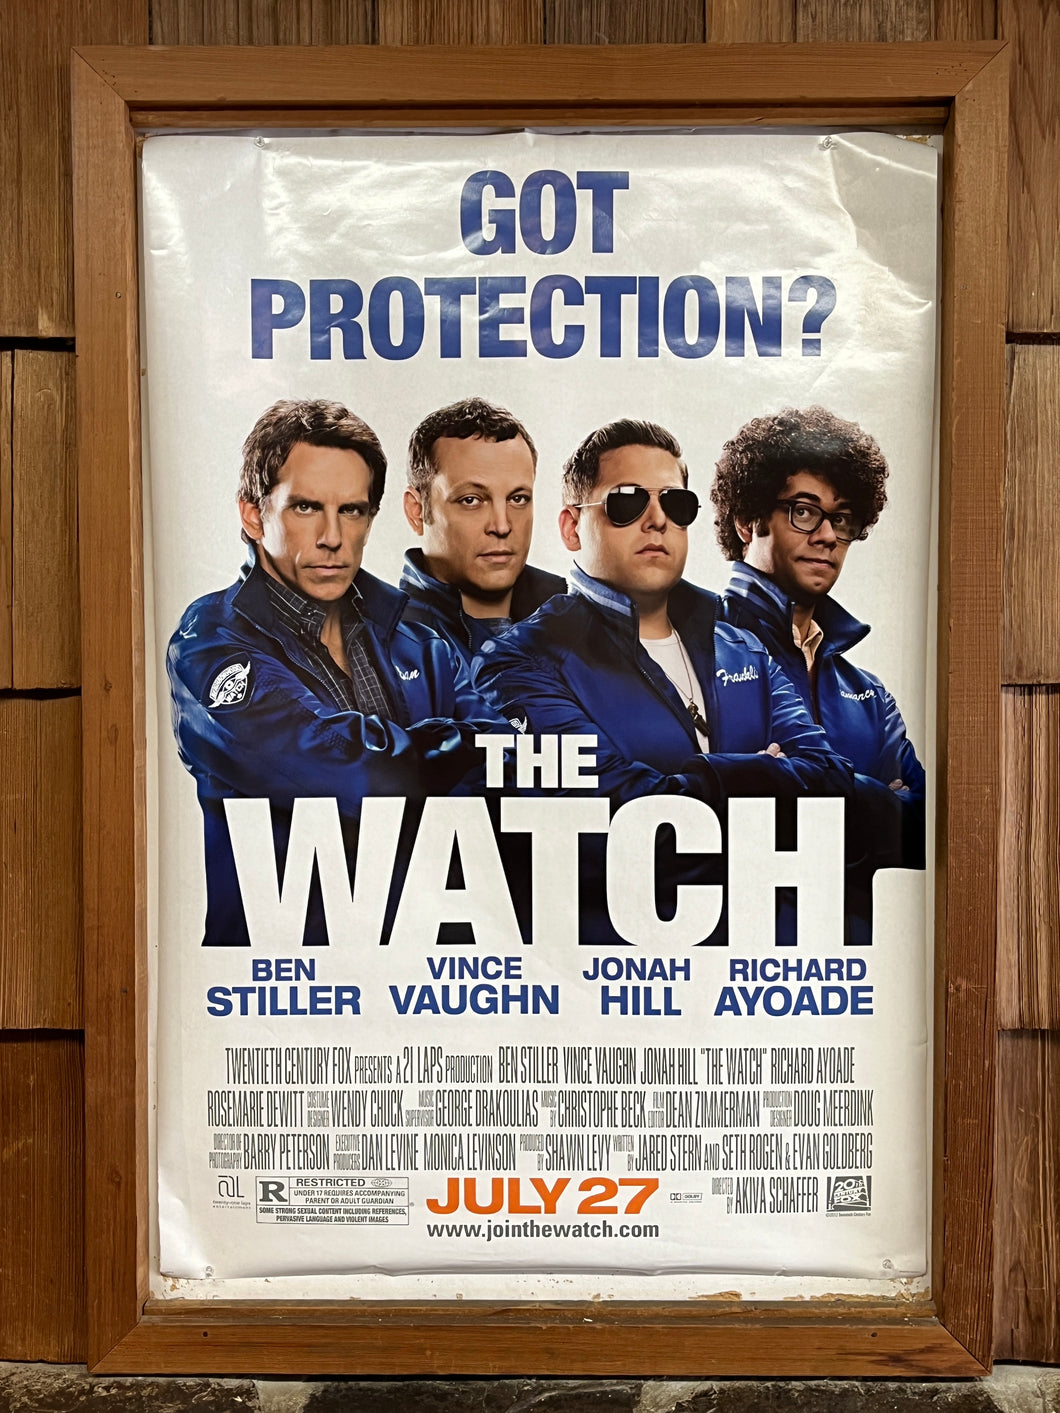 Watch, The (2012)